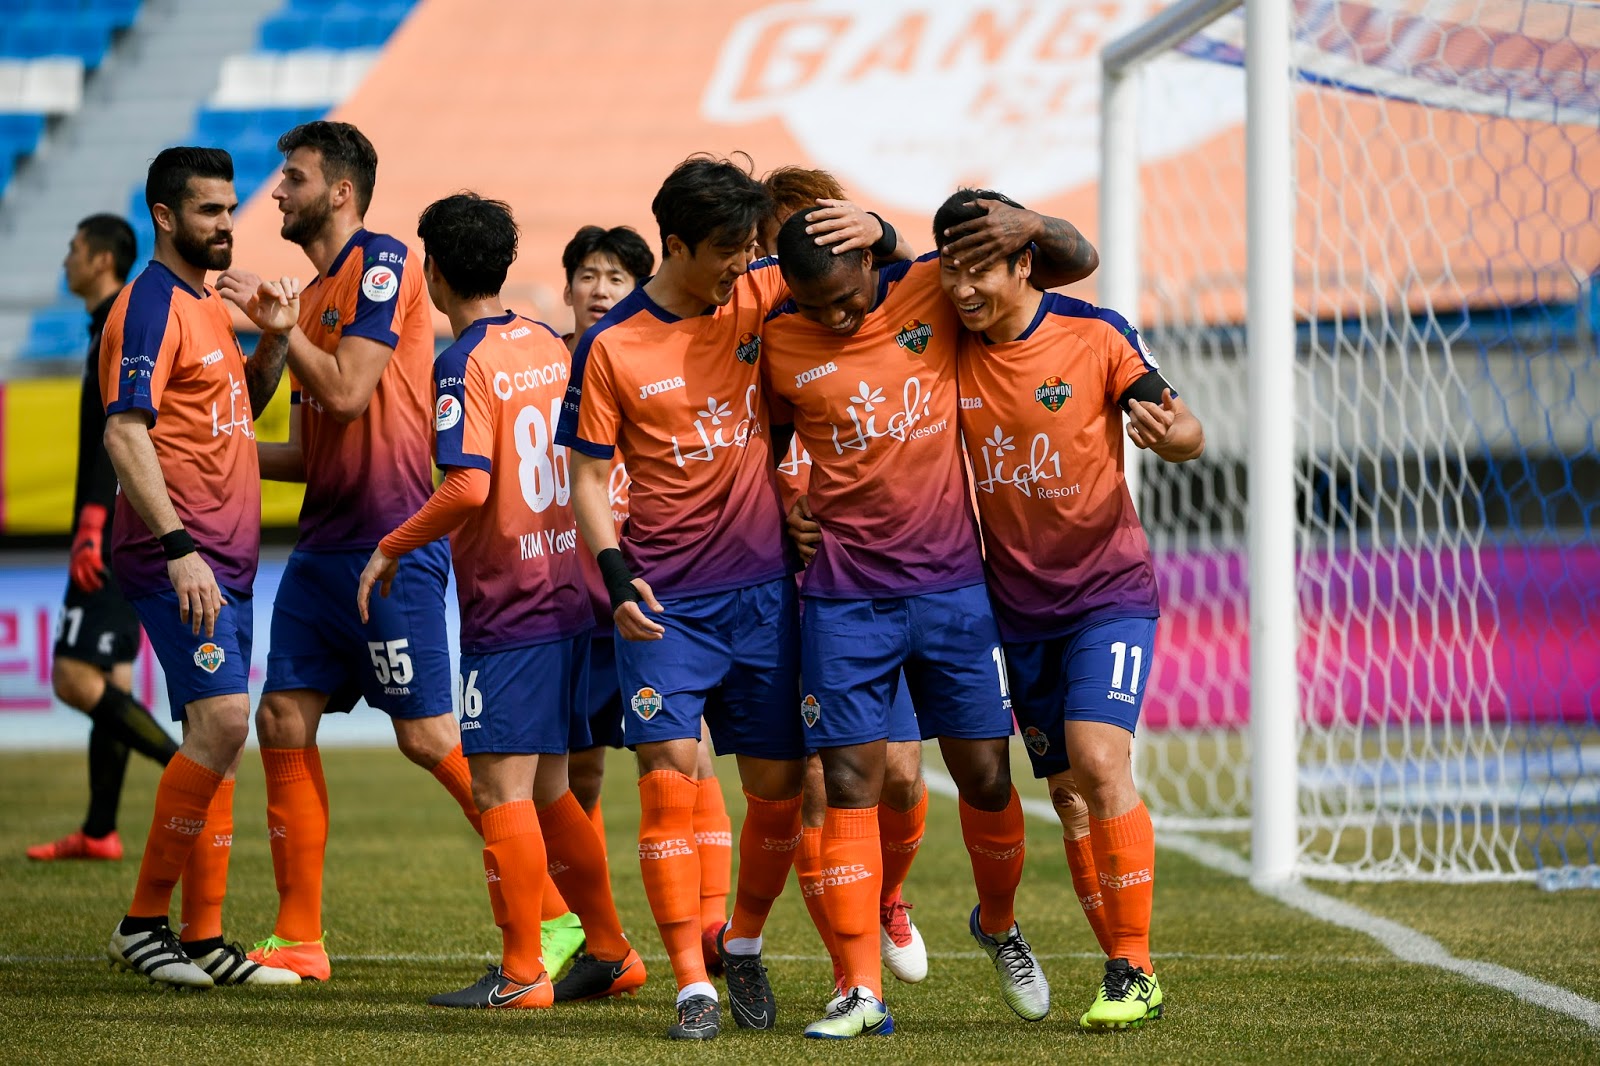 The K League Coach Analysis Round 3: Inverted Wingers